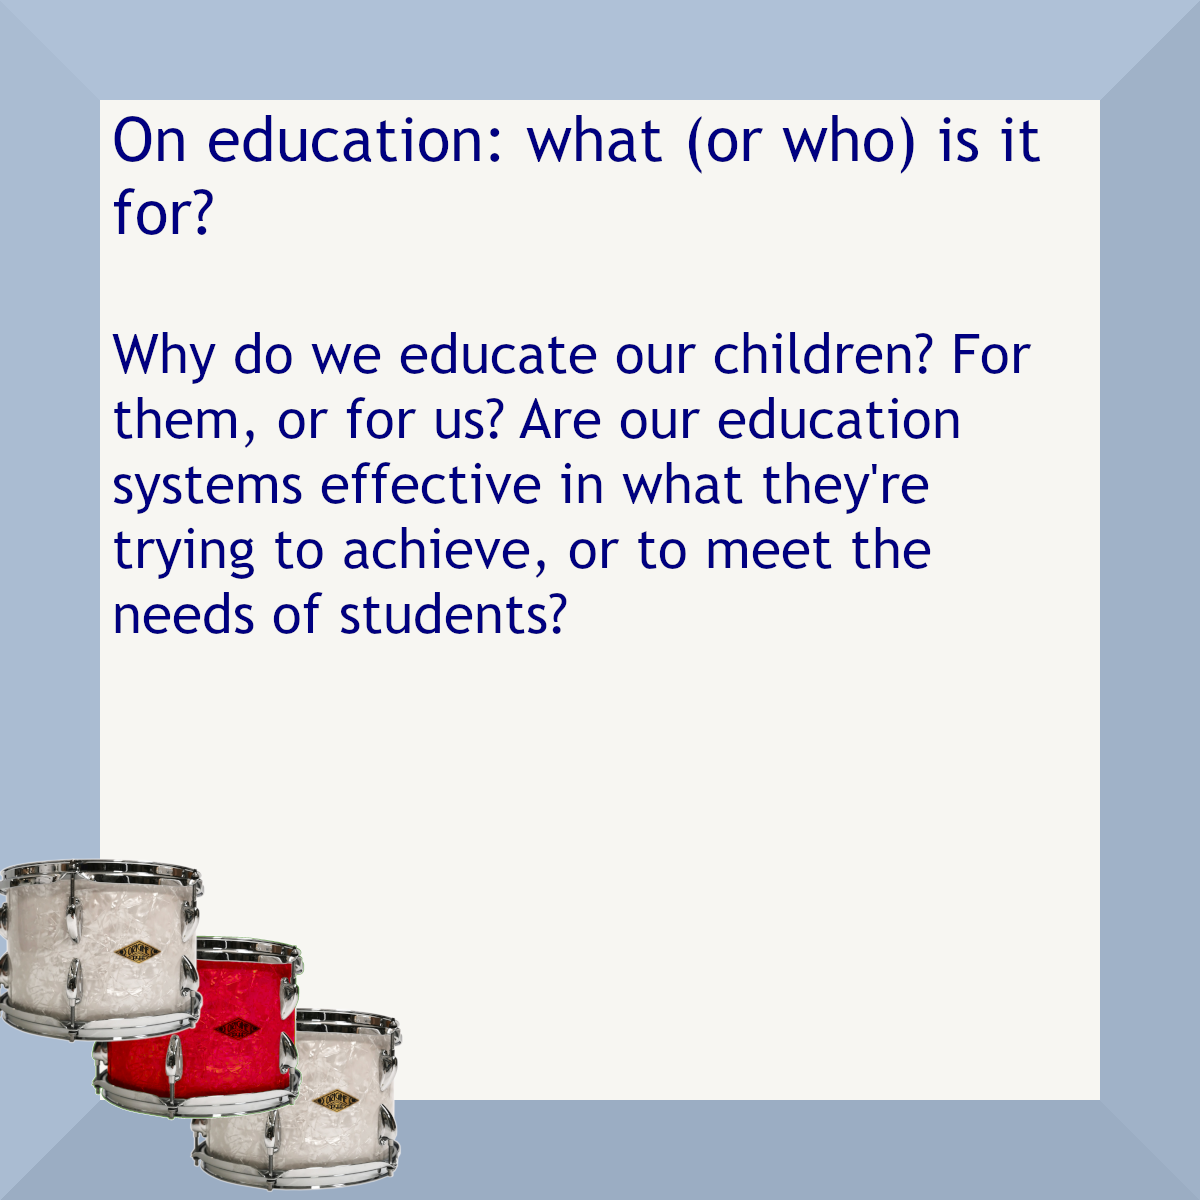 Blue border with three drums in one corner (one drum is red). Text: On education: what (or who) is it for? Why do we educate our children? For them, or for us? Are our education systems effective in what they're trying to achieve, or to meet the needs of students?